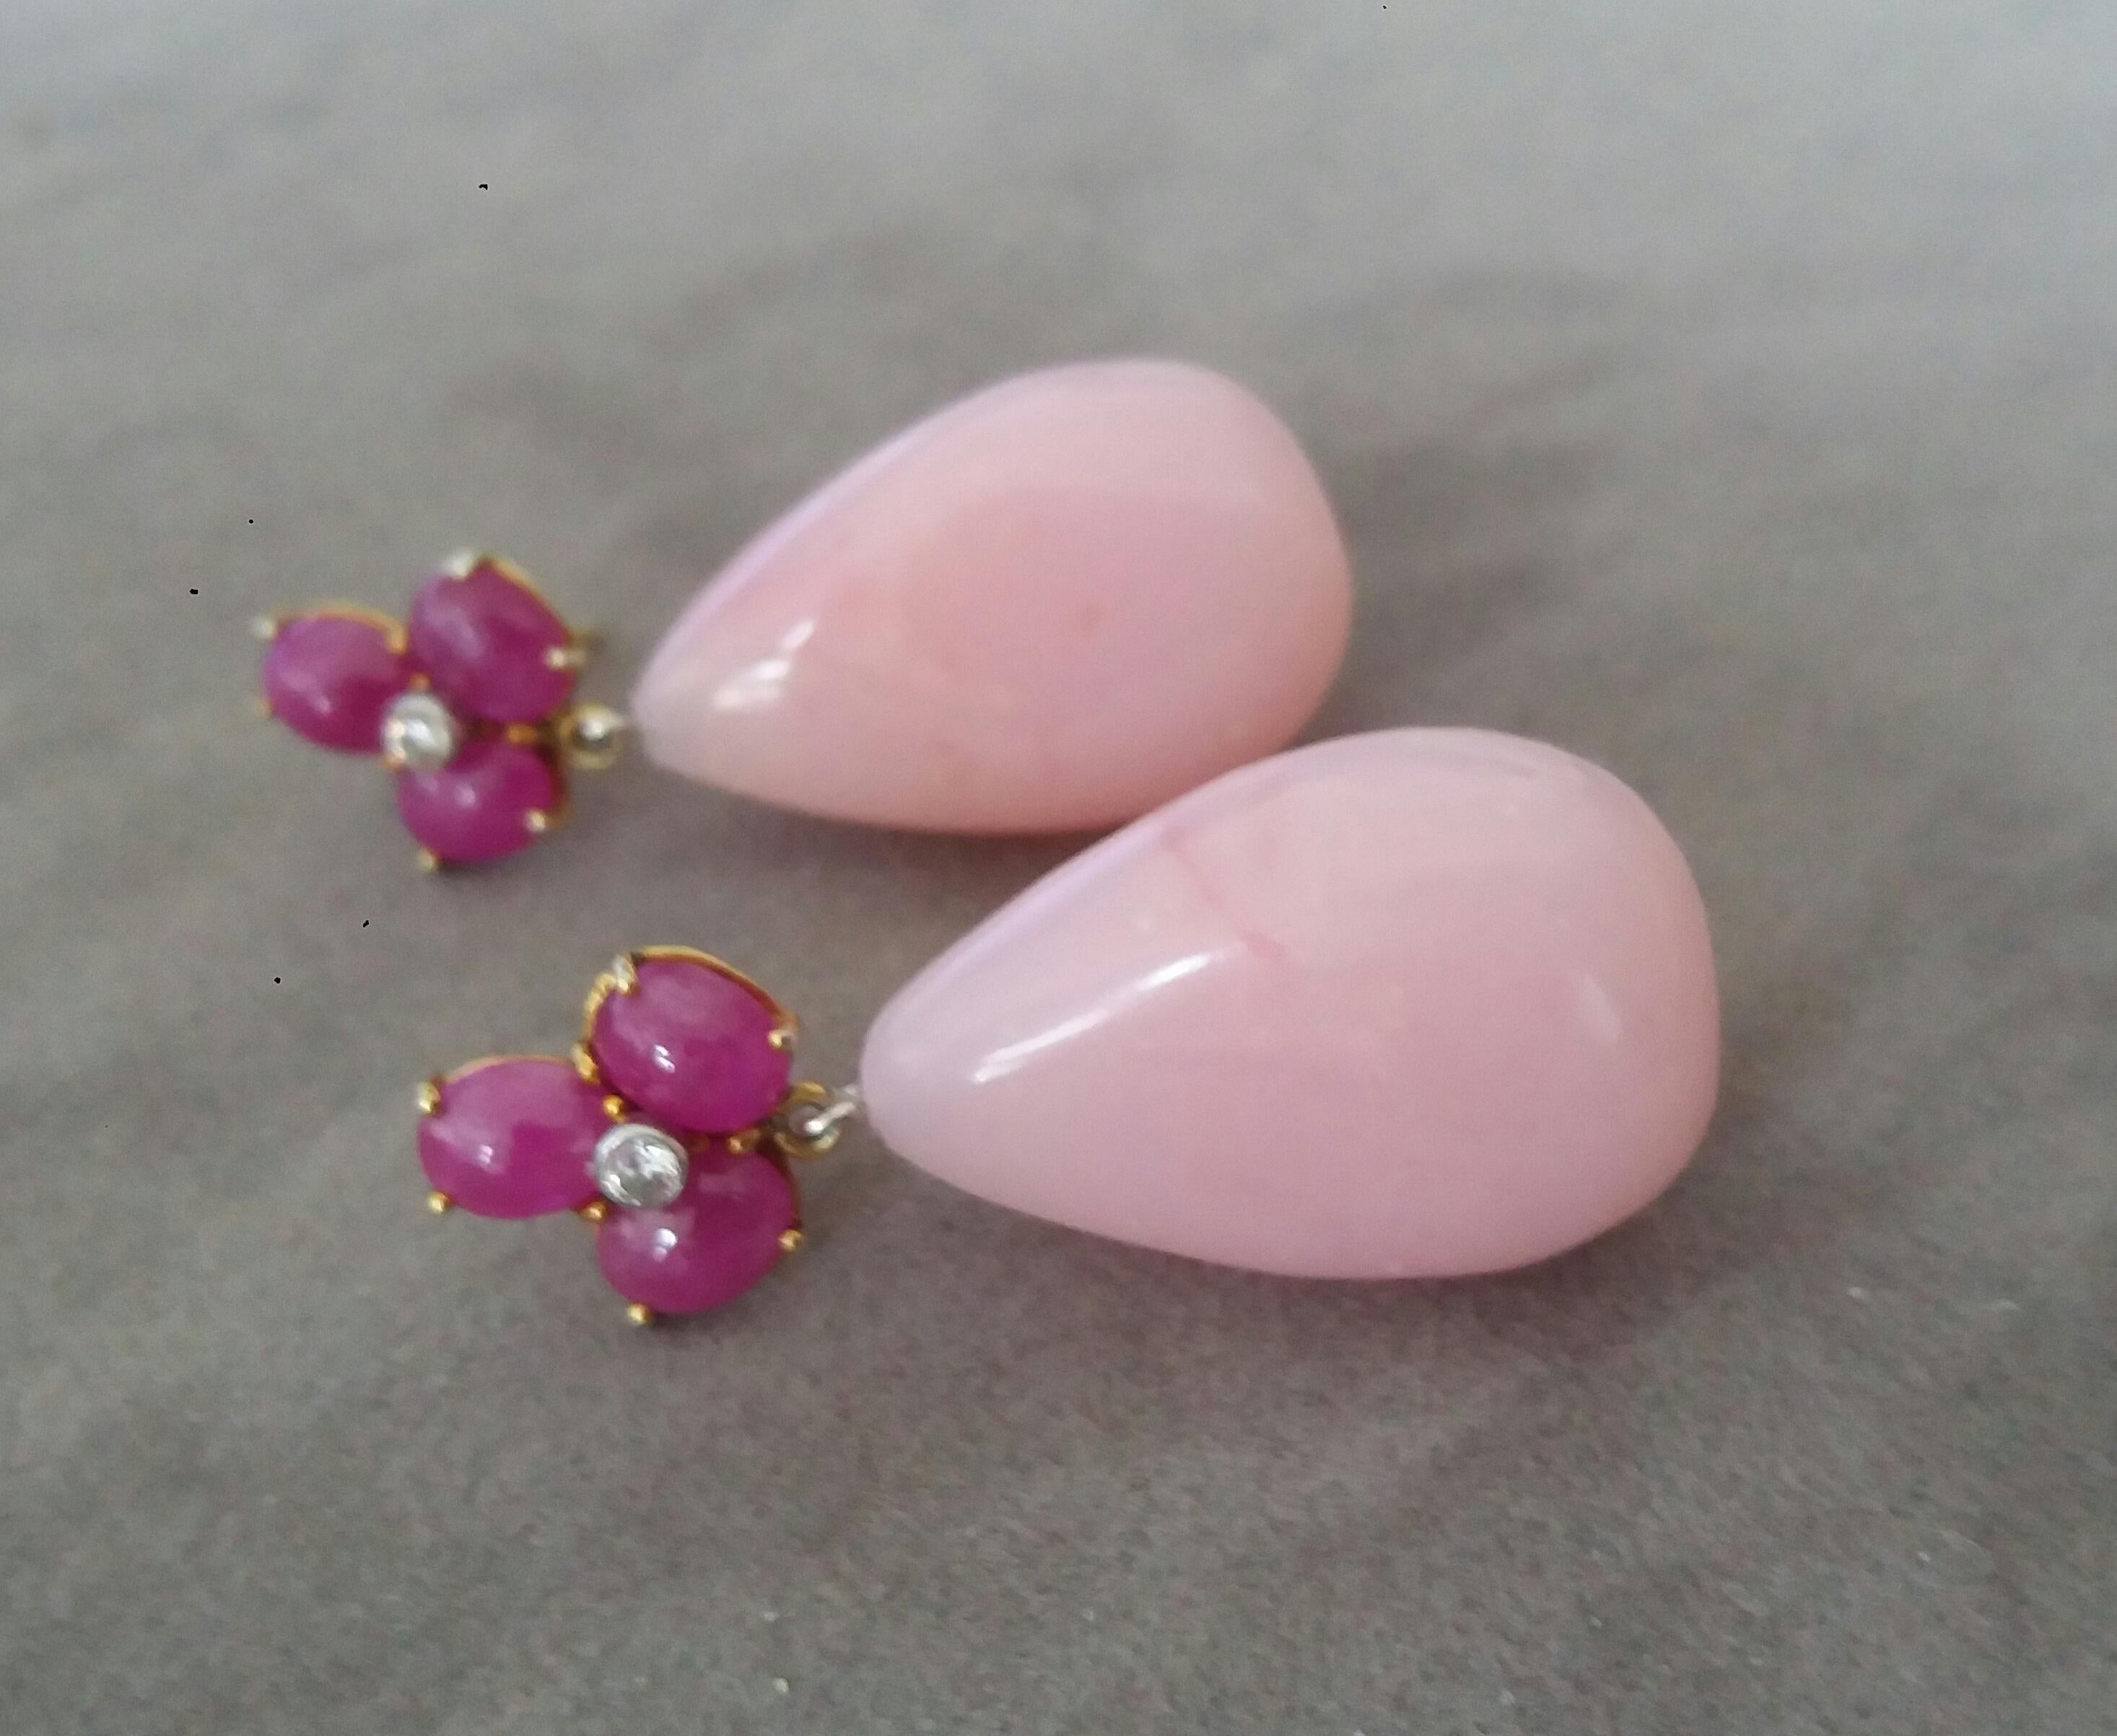 Contemporary 3 Ruby Oval Cabs 14 Kt Yellow Gold Diamonds Pink Opal Pear Shape Drops Earrings